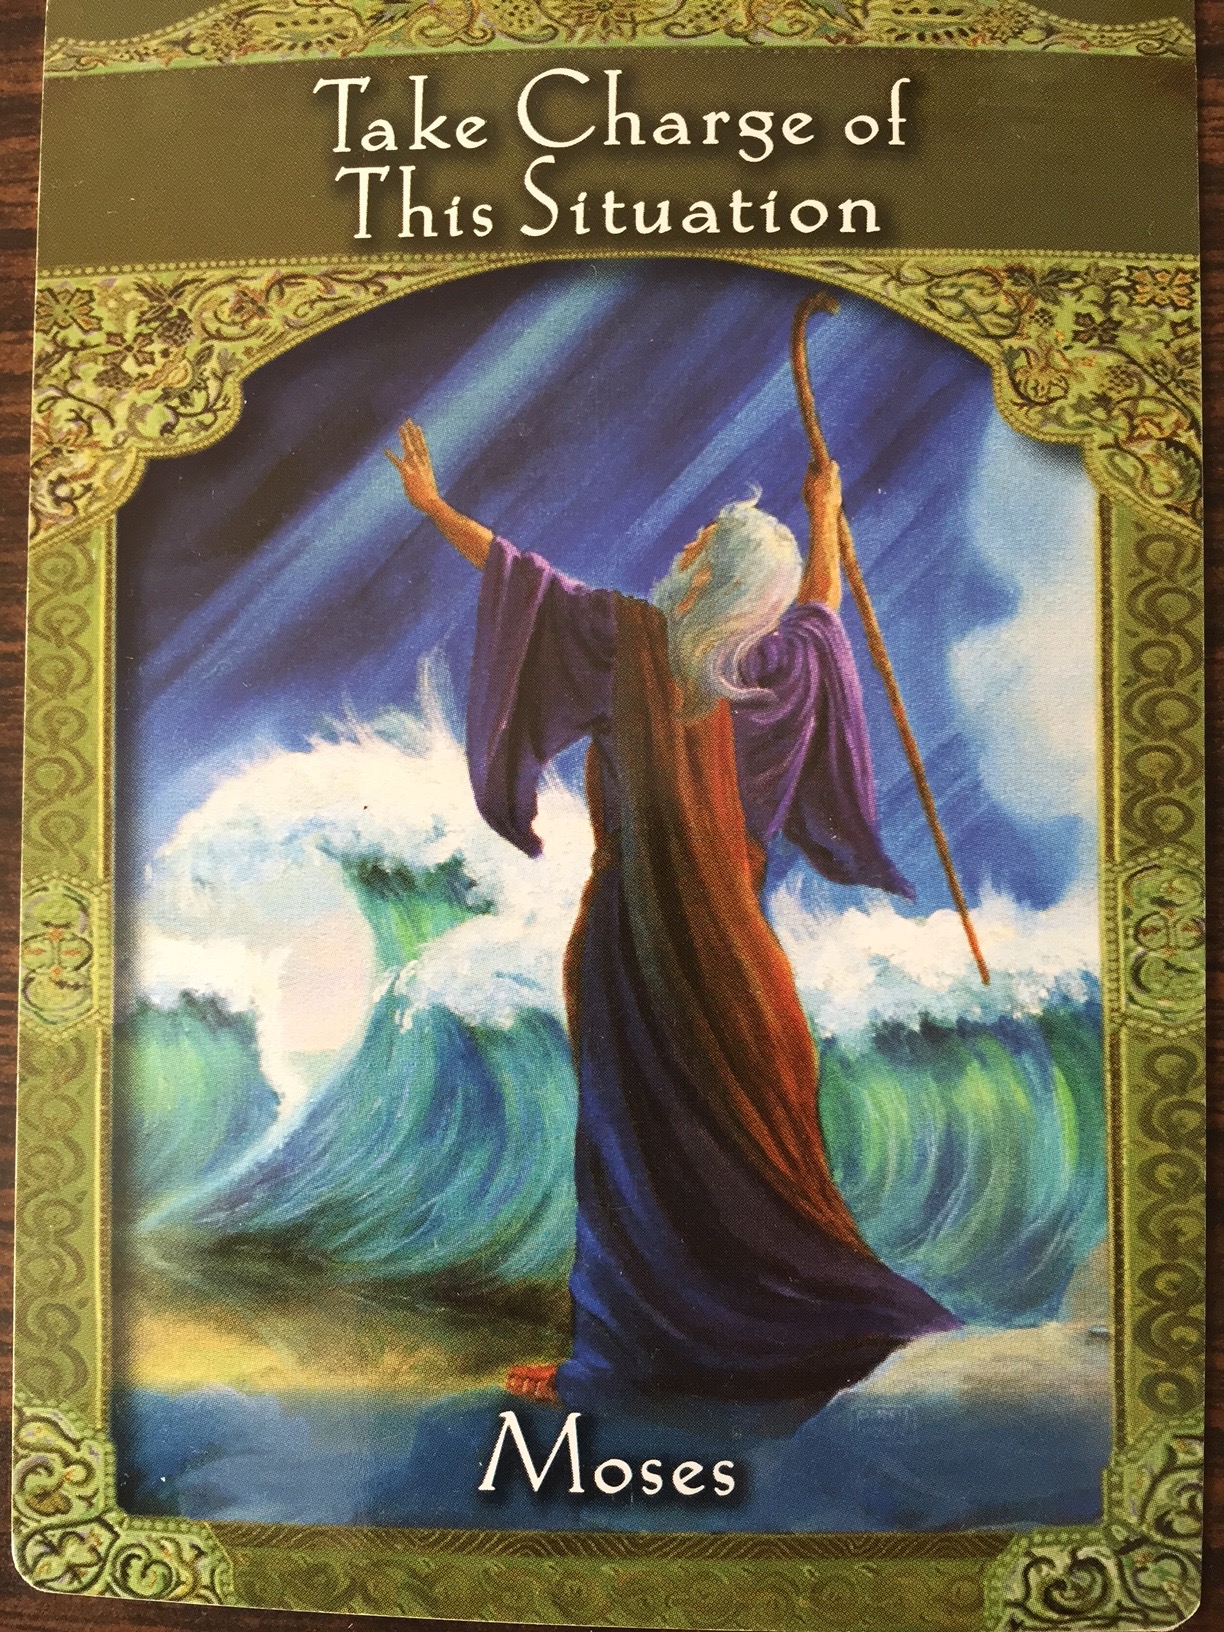 Moses-Ascended Mater Card by Doreen Virtue